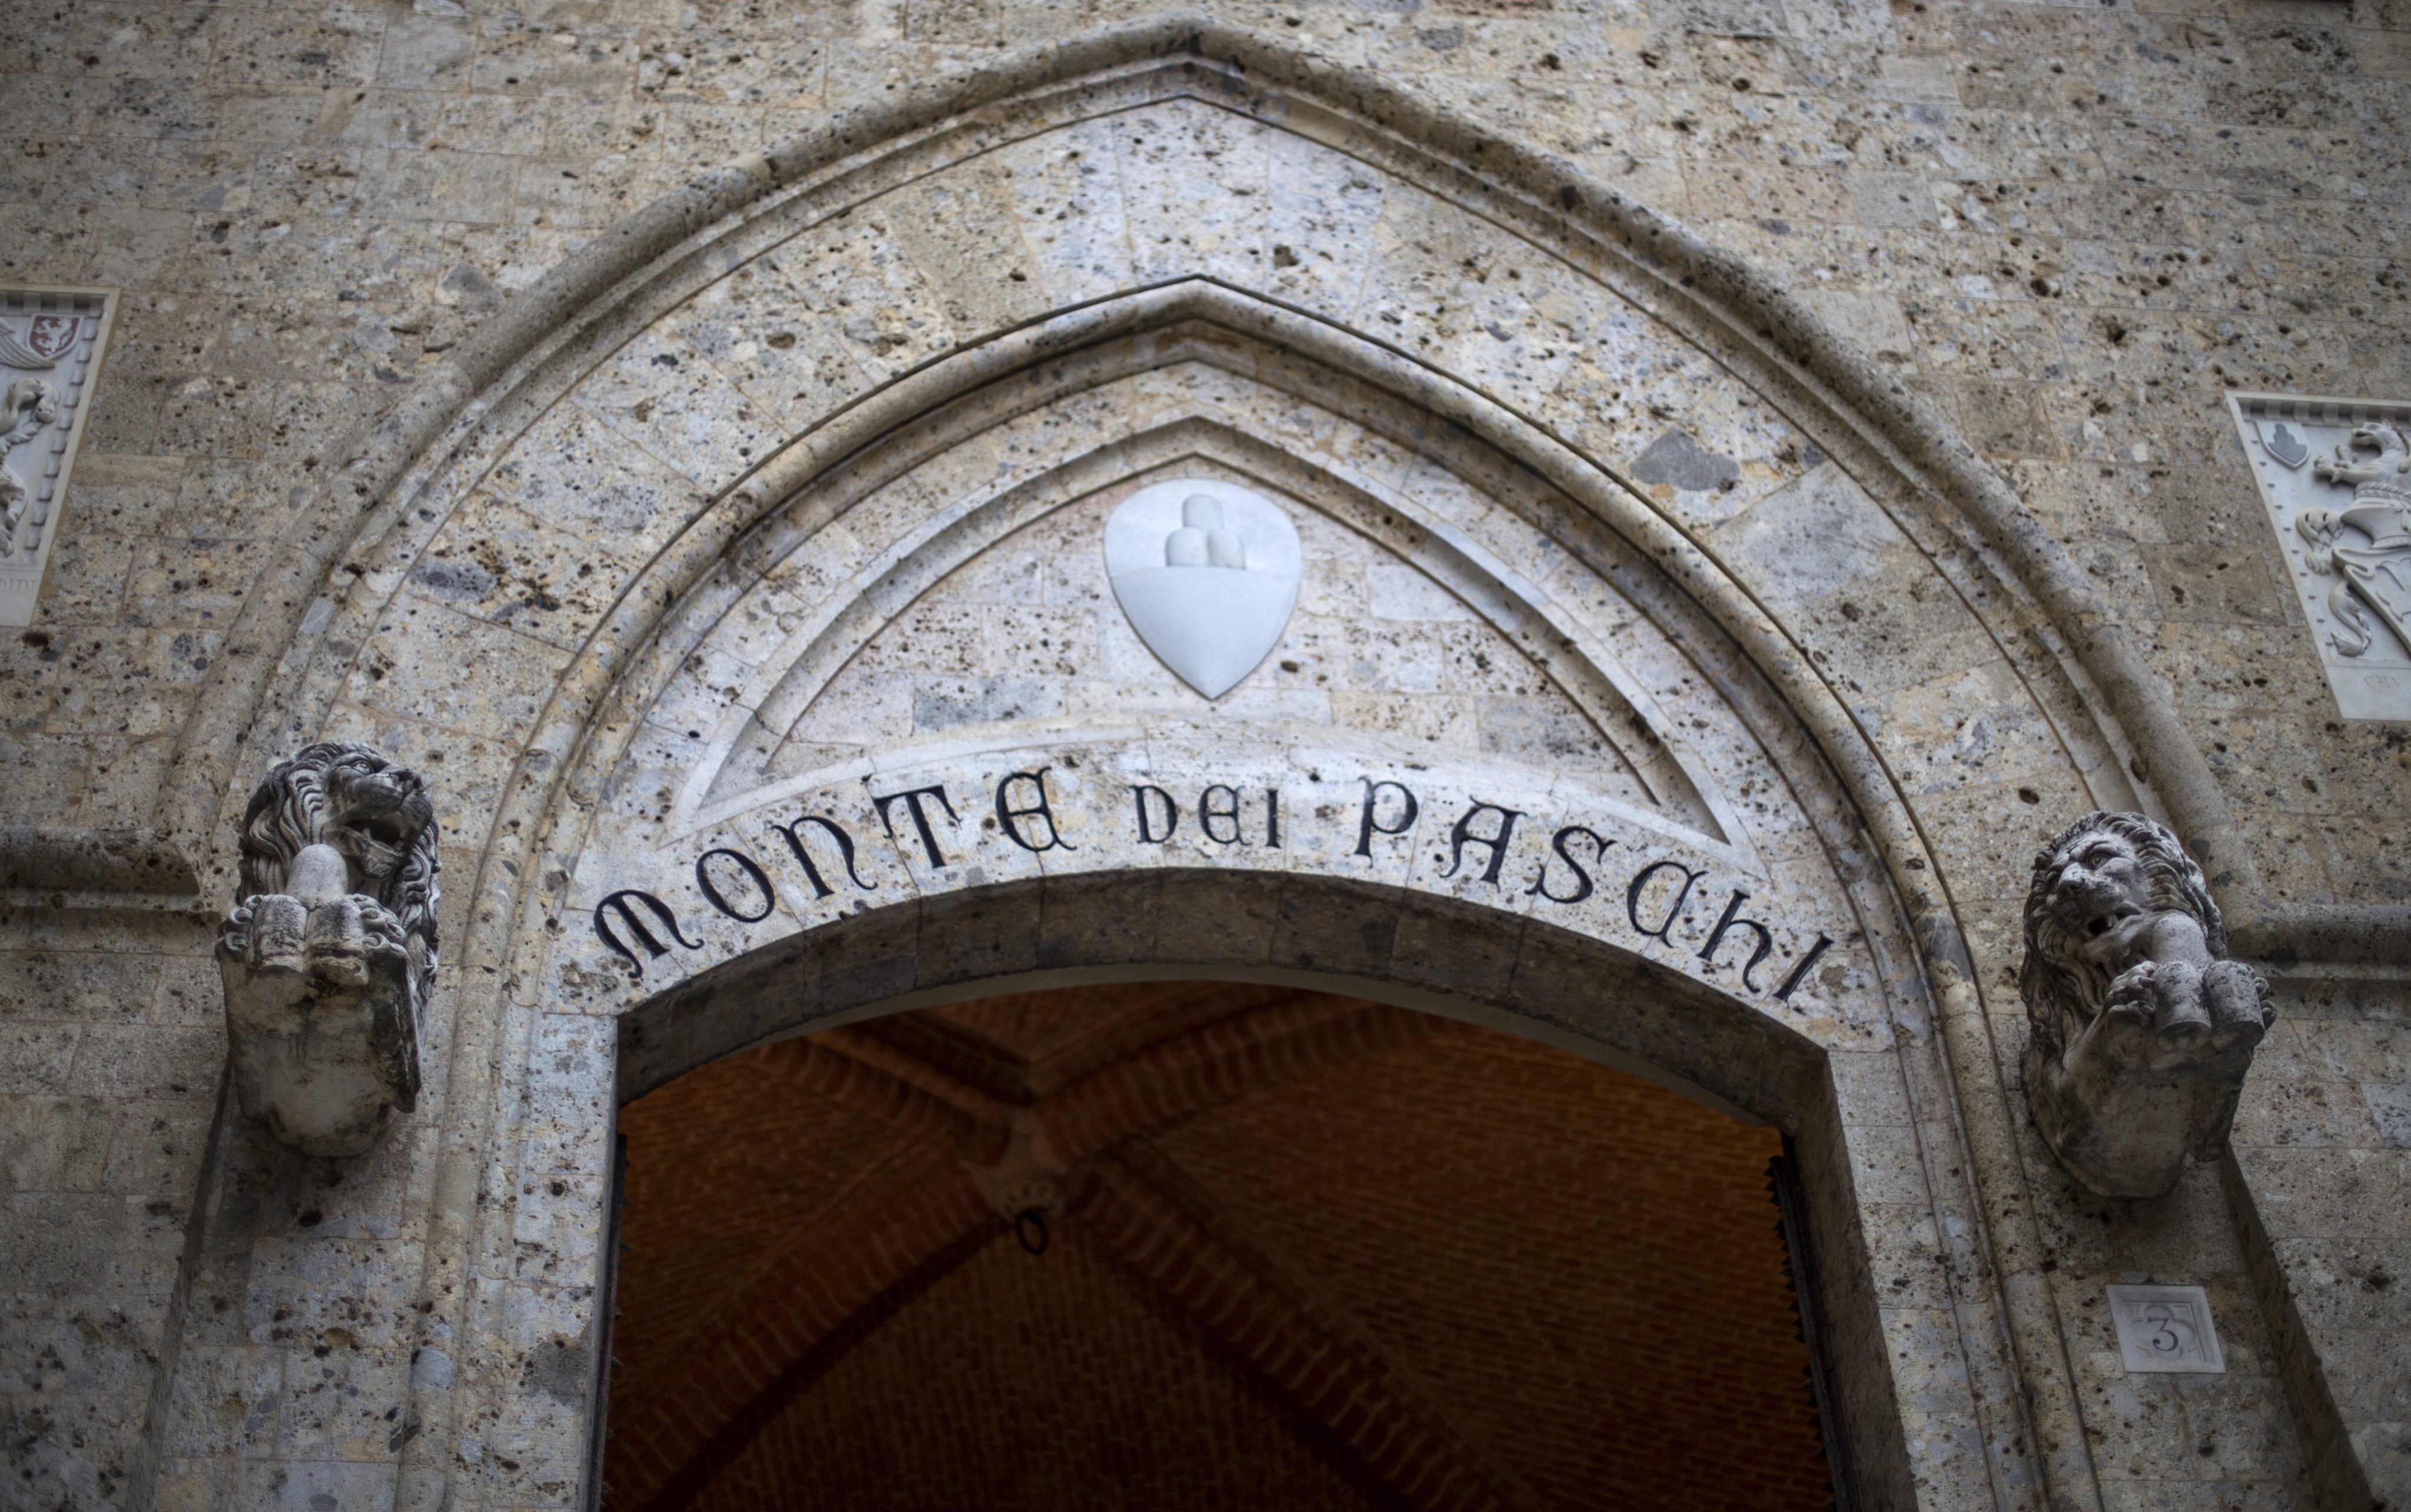 2016-03-23 22:19:13 epa05602059 (FILE) A file picture dated 23 March 2016 shows Banca Monte dei Paschi di Siena (BMPS or MPS) headquarters in Piazza Salimbeni, in Siena, Italy. MPS said in a statement on 25 October 2016, it would cut around 2,600 jobs and shut 500 branches as part of its reforming plans between the years 2016 to 2019. MPS board has called for an extraordinary shareholders' meeting on 24 November to approve a capital increase of 5 billion euro aimed to save the troubled Italian commercial bank. EPA/MATTIA SEDDA